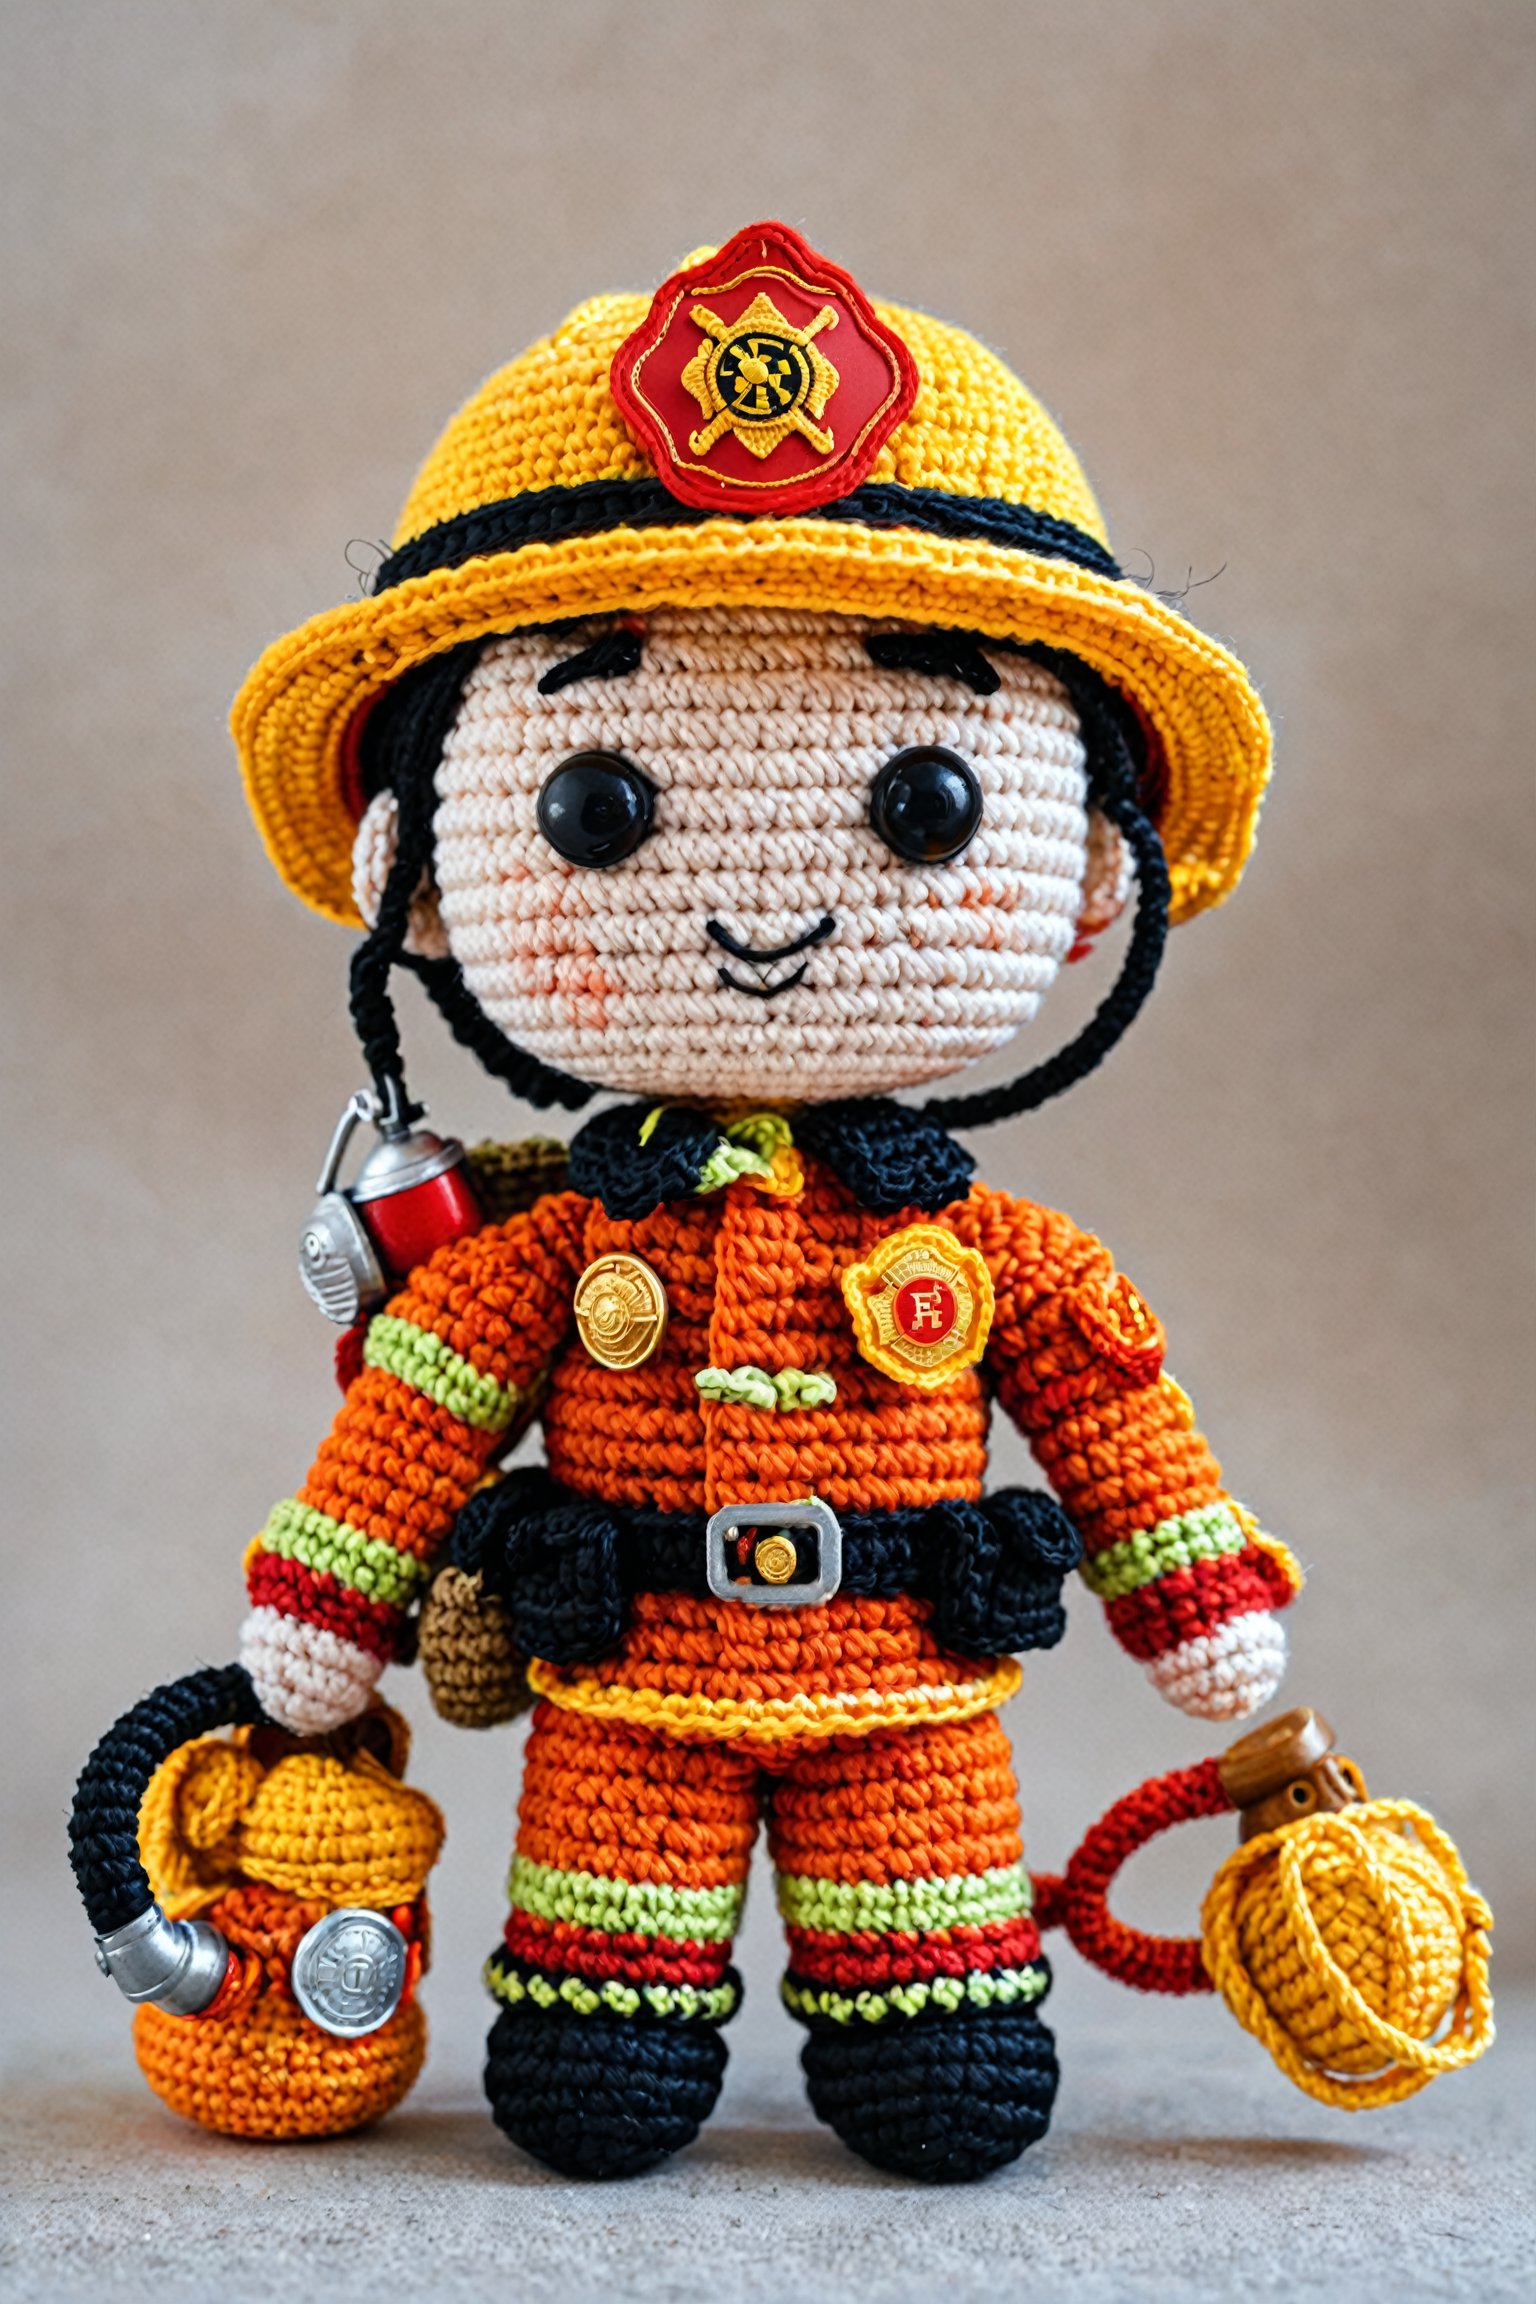 A crocheted toy resembling a firefighter. The toy has a round face with rosy cheeks, big black eyes, and a small mouth. It wears a vibrant orange and yellow firefighter uniform with a matching hat that features a badge. The toy also carries a miniature hose on its back. The crocheted texture is evident throughout, and the toy stands against a neutral background.